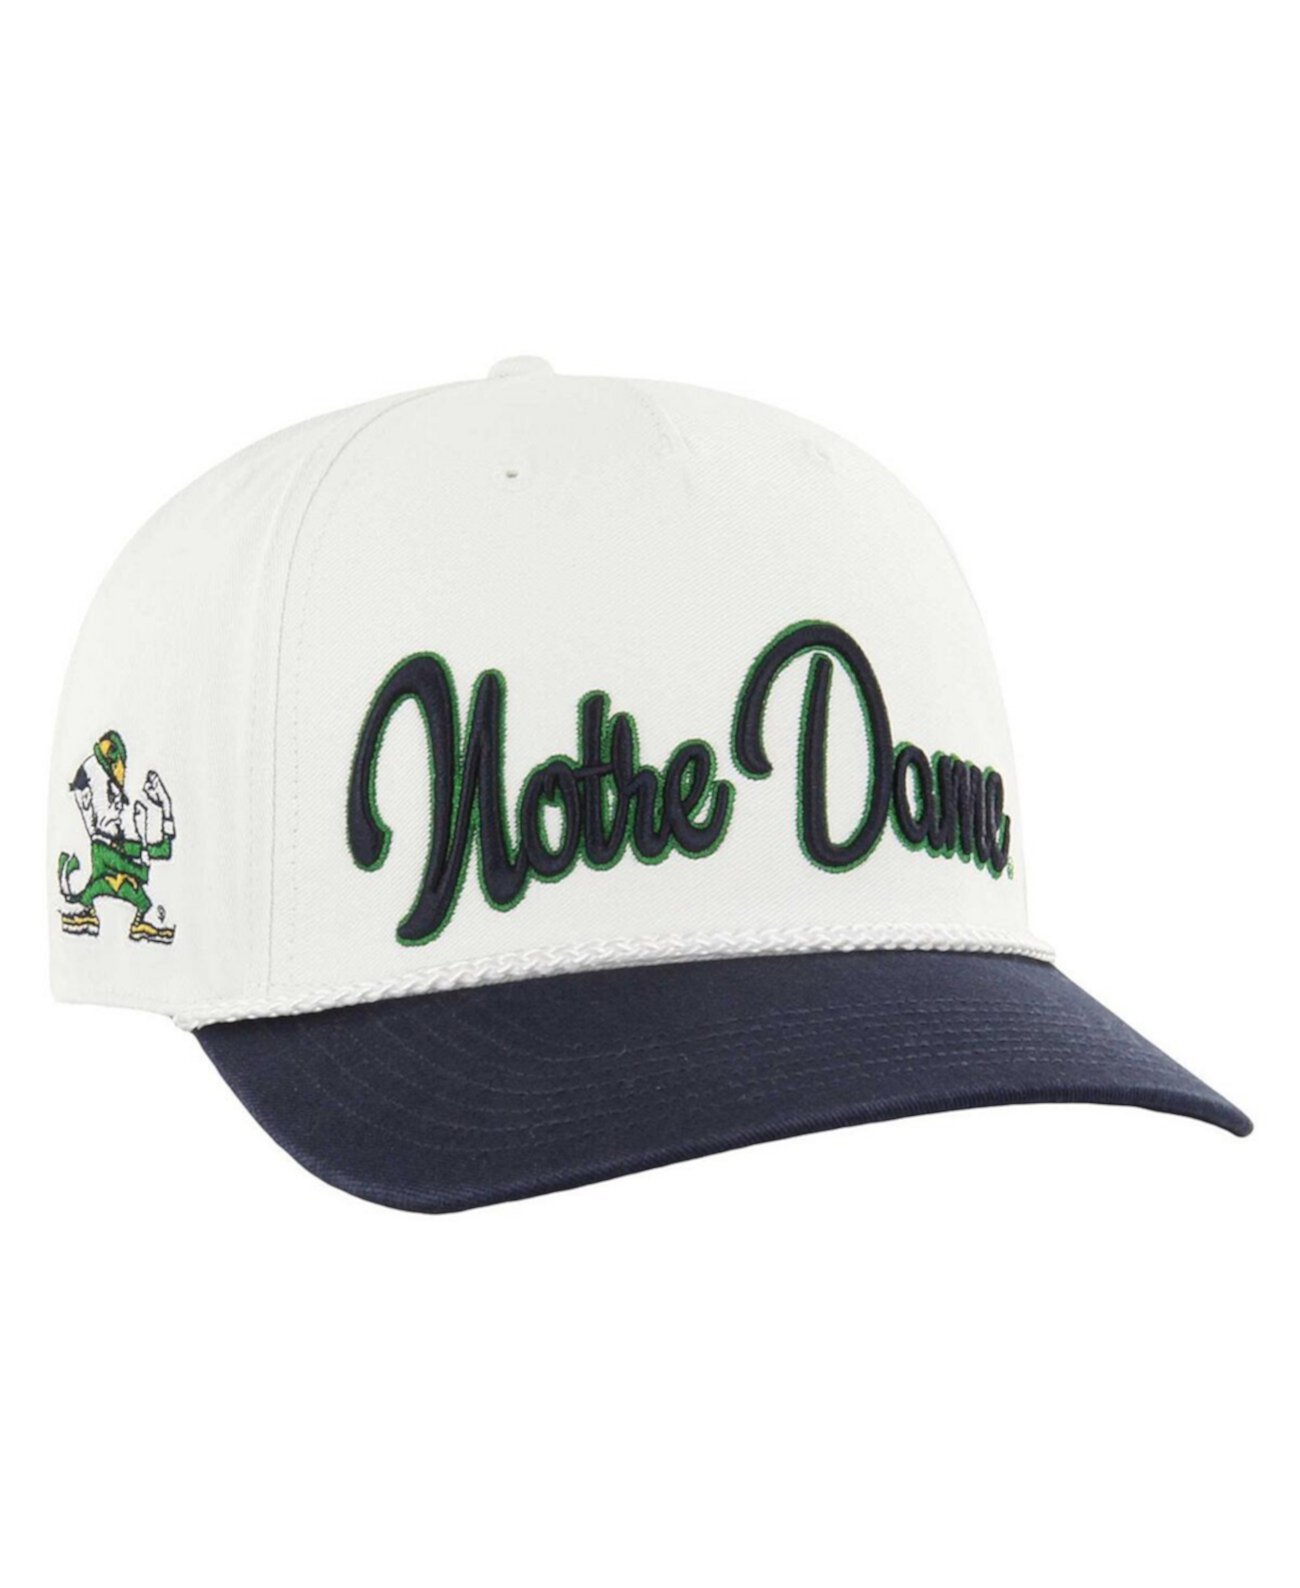 Men's White/Navy Notre Dame Fighting Irish Overhand Hitch Two-Toned Adjustable Hat '47 Brand